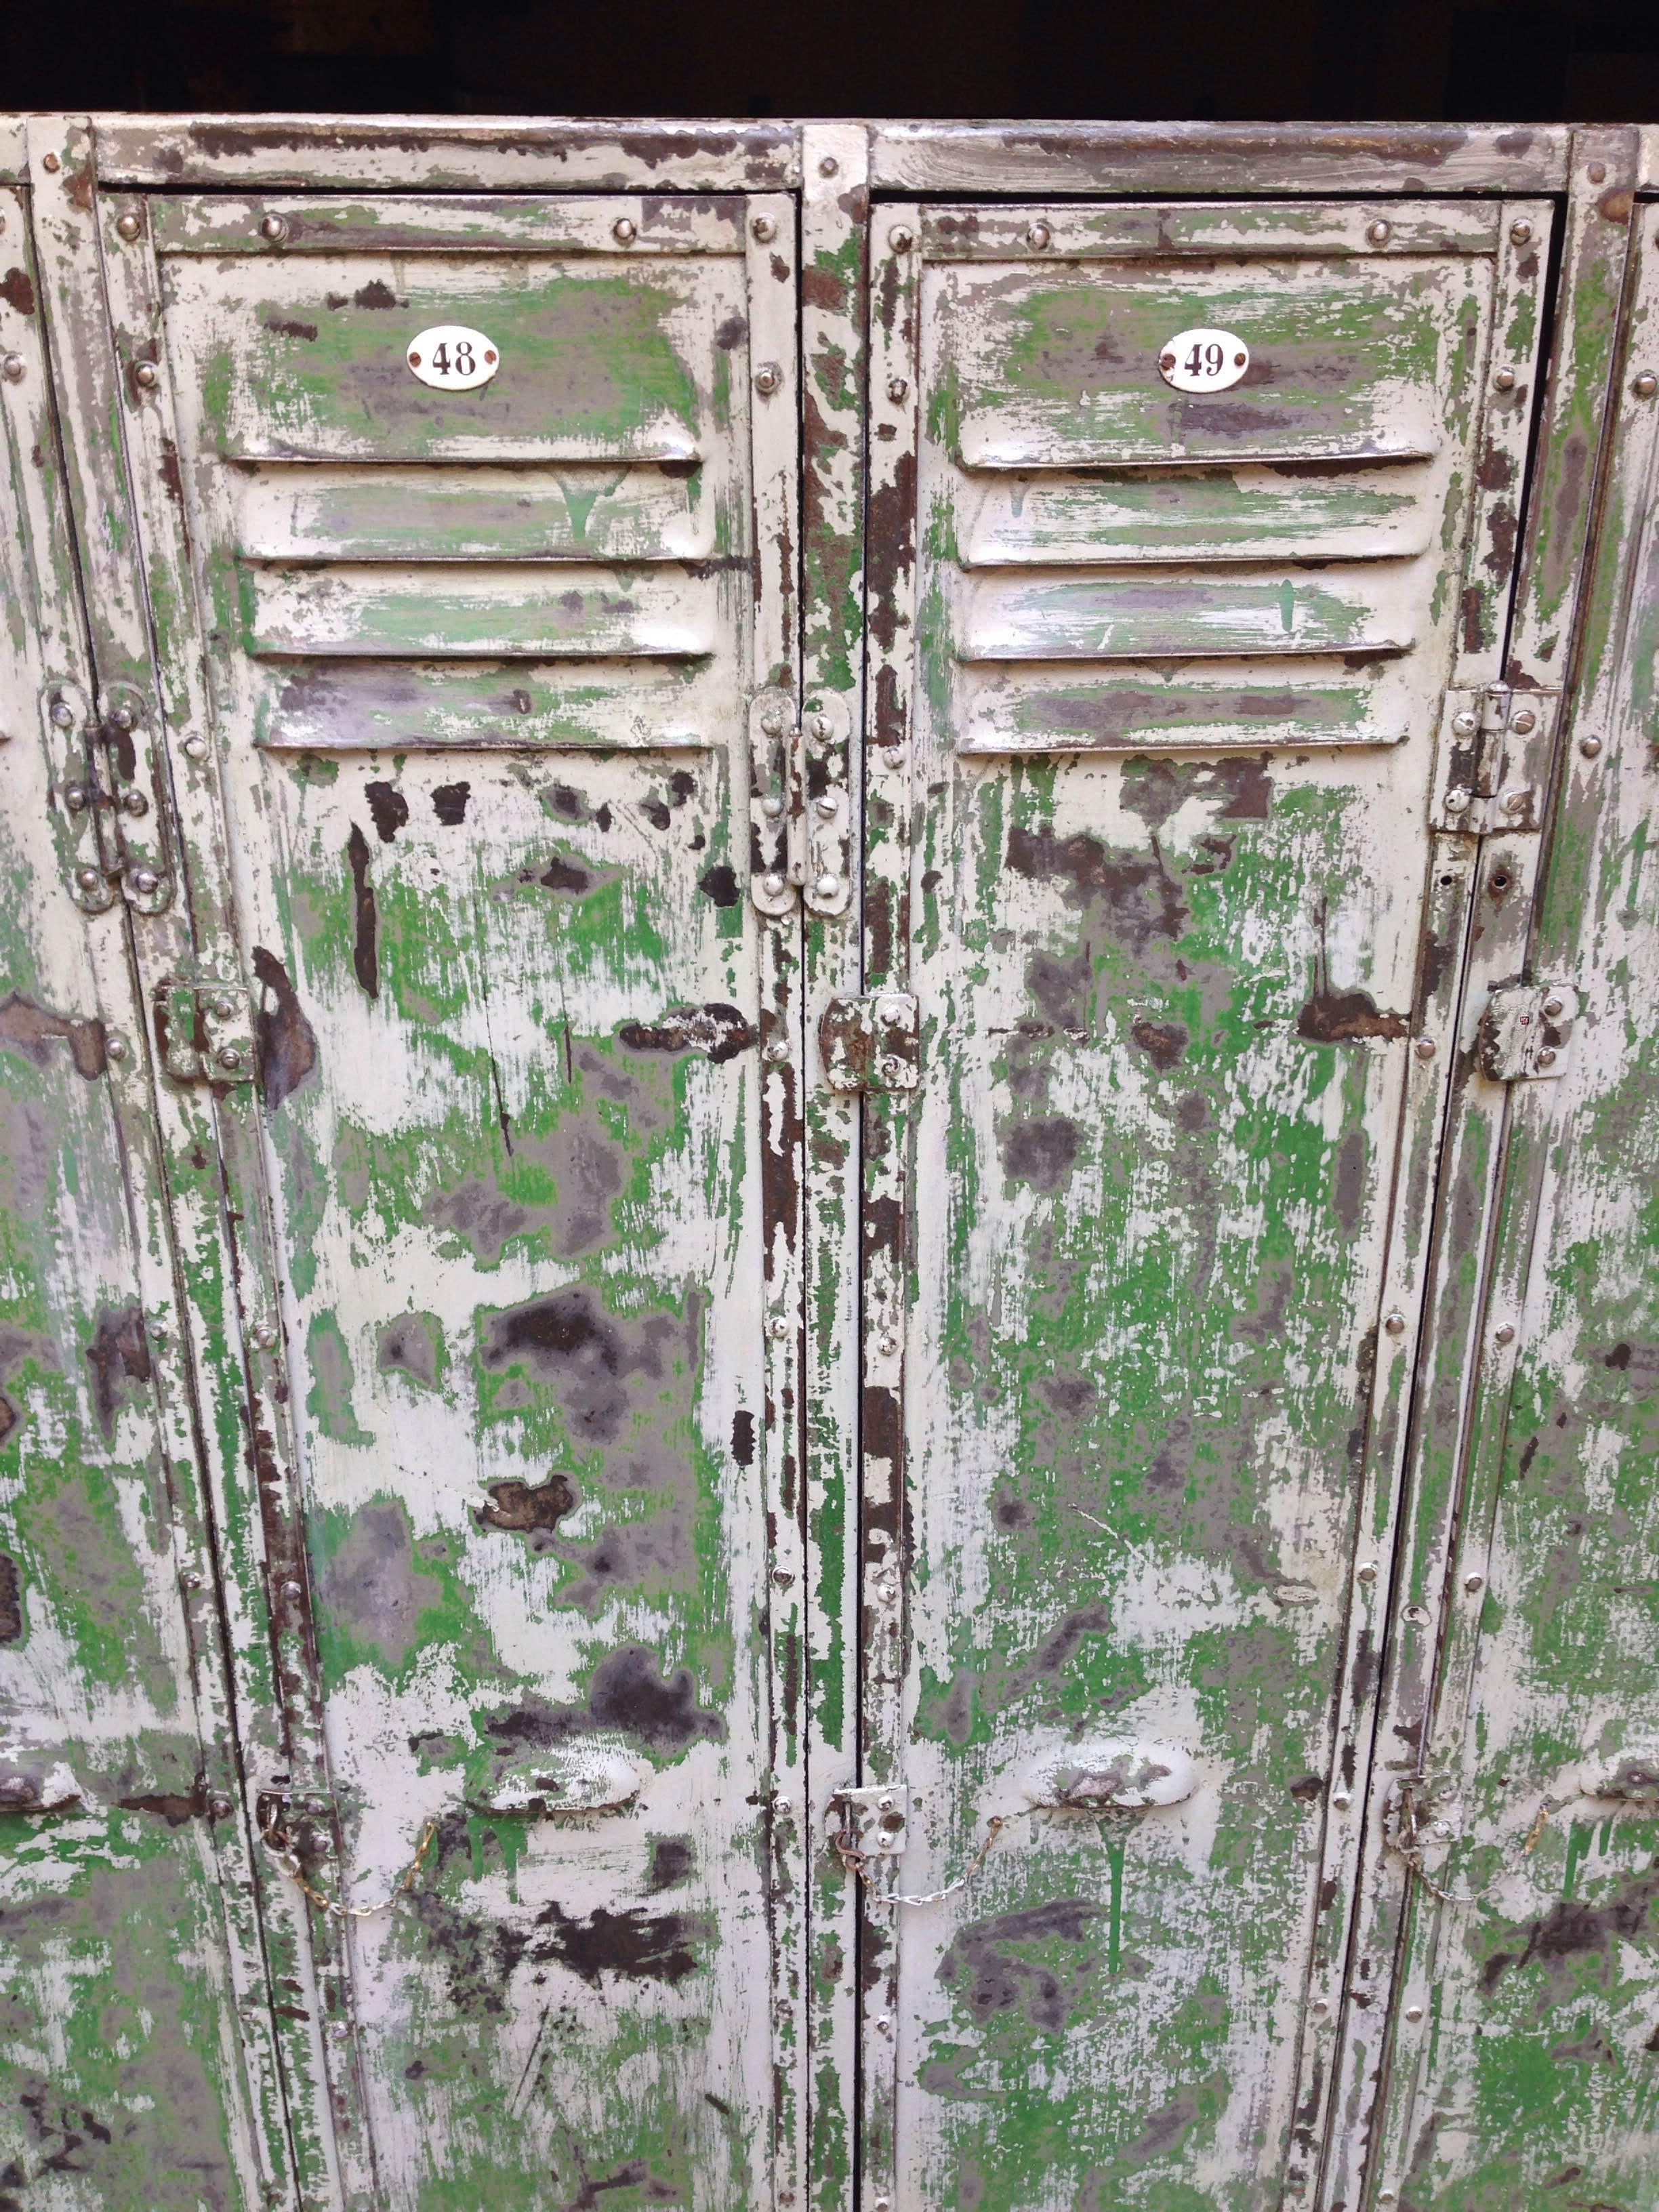 This 4 door locker is one of those typical lockers that were used in factories and in other industrial environments.

At the time of purchase this cabinet was completely gray, with the restoration work, the shades of green have emerged witnessing